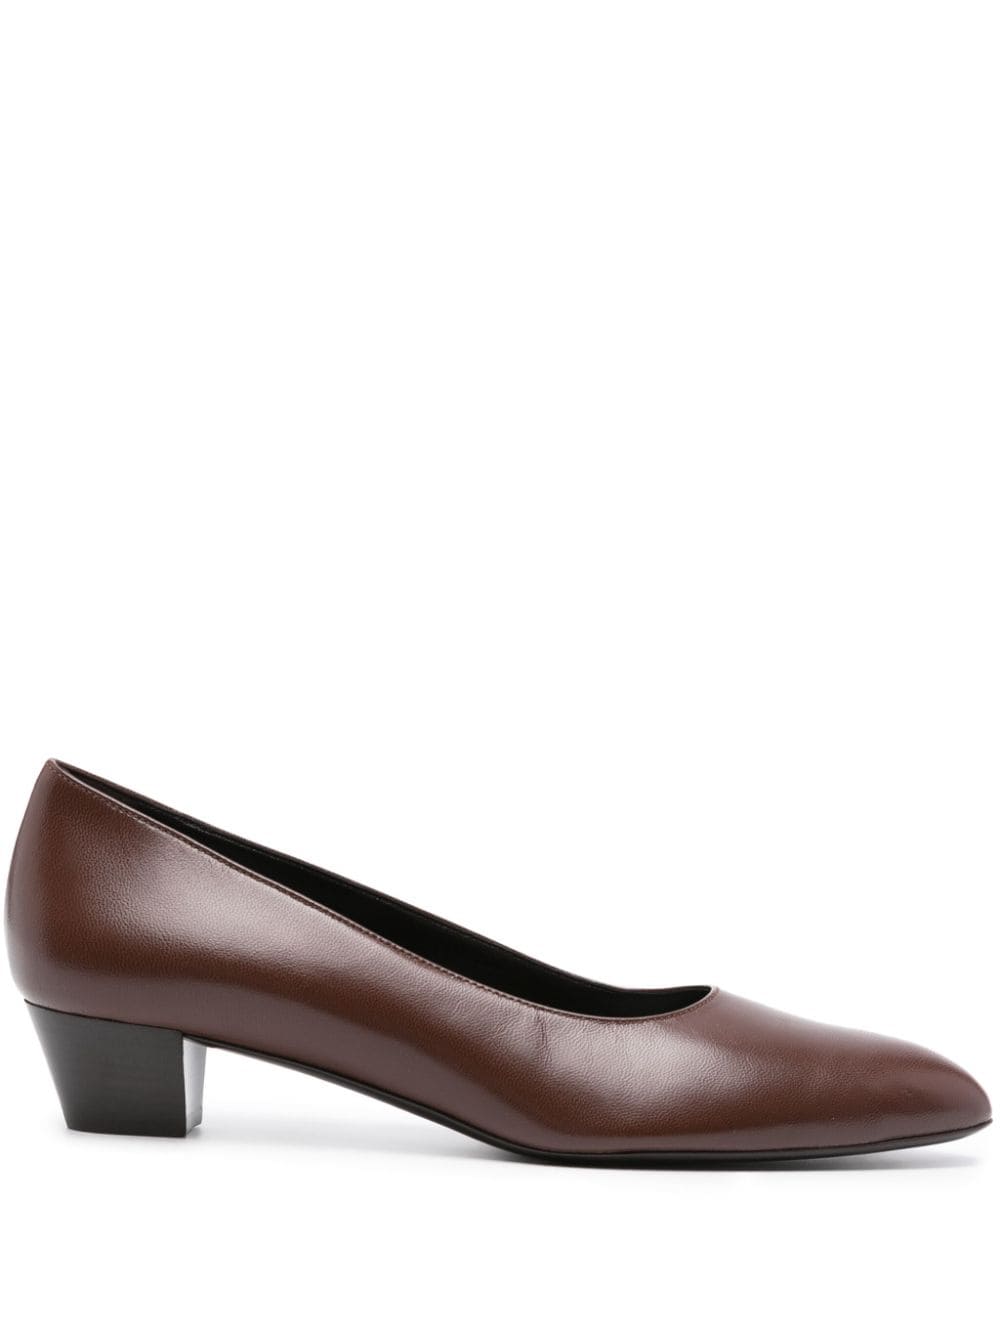 The Row Luisa 35mm leather pumps - Brown von The Row